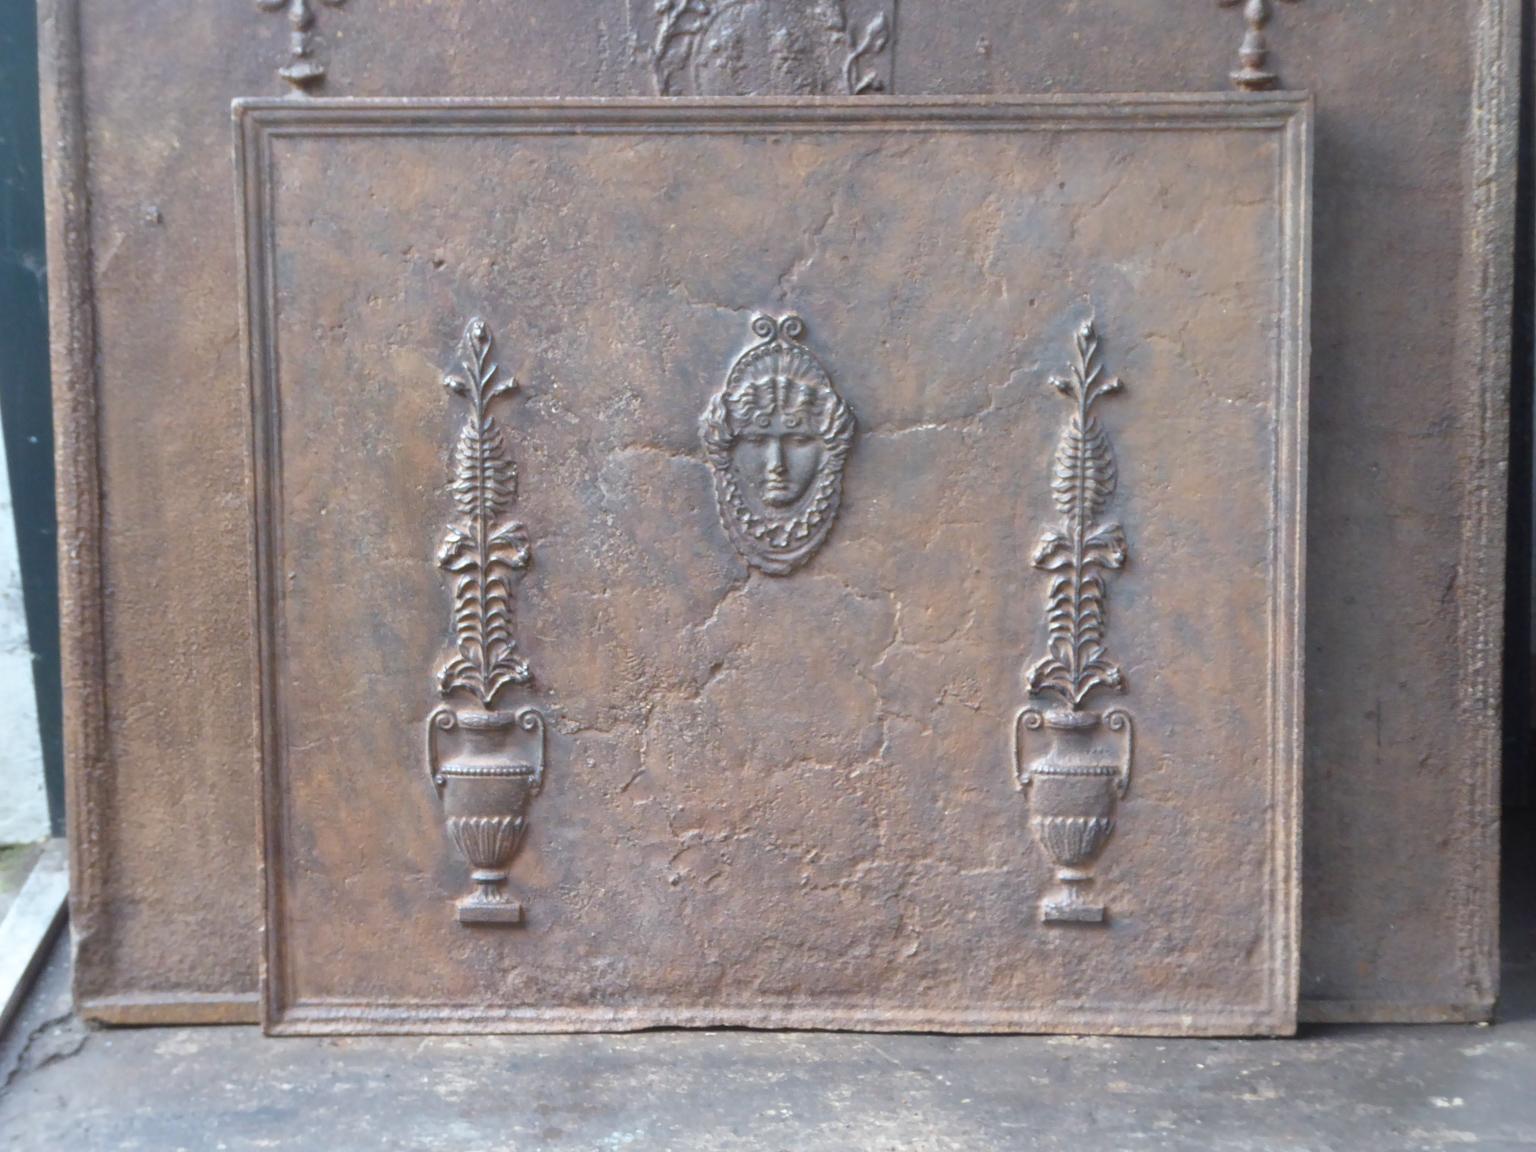 18th-19th century French neoclassical fireback with a typical neoclassical decoration.

The fireback is made of cast iron and has a natural brown patina. Upon request it can be made black or pewter. The fireback is in a good condition and does not